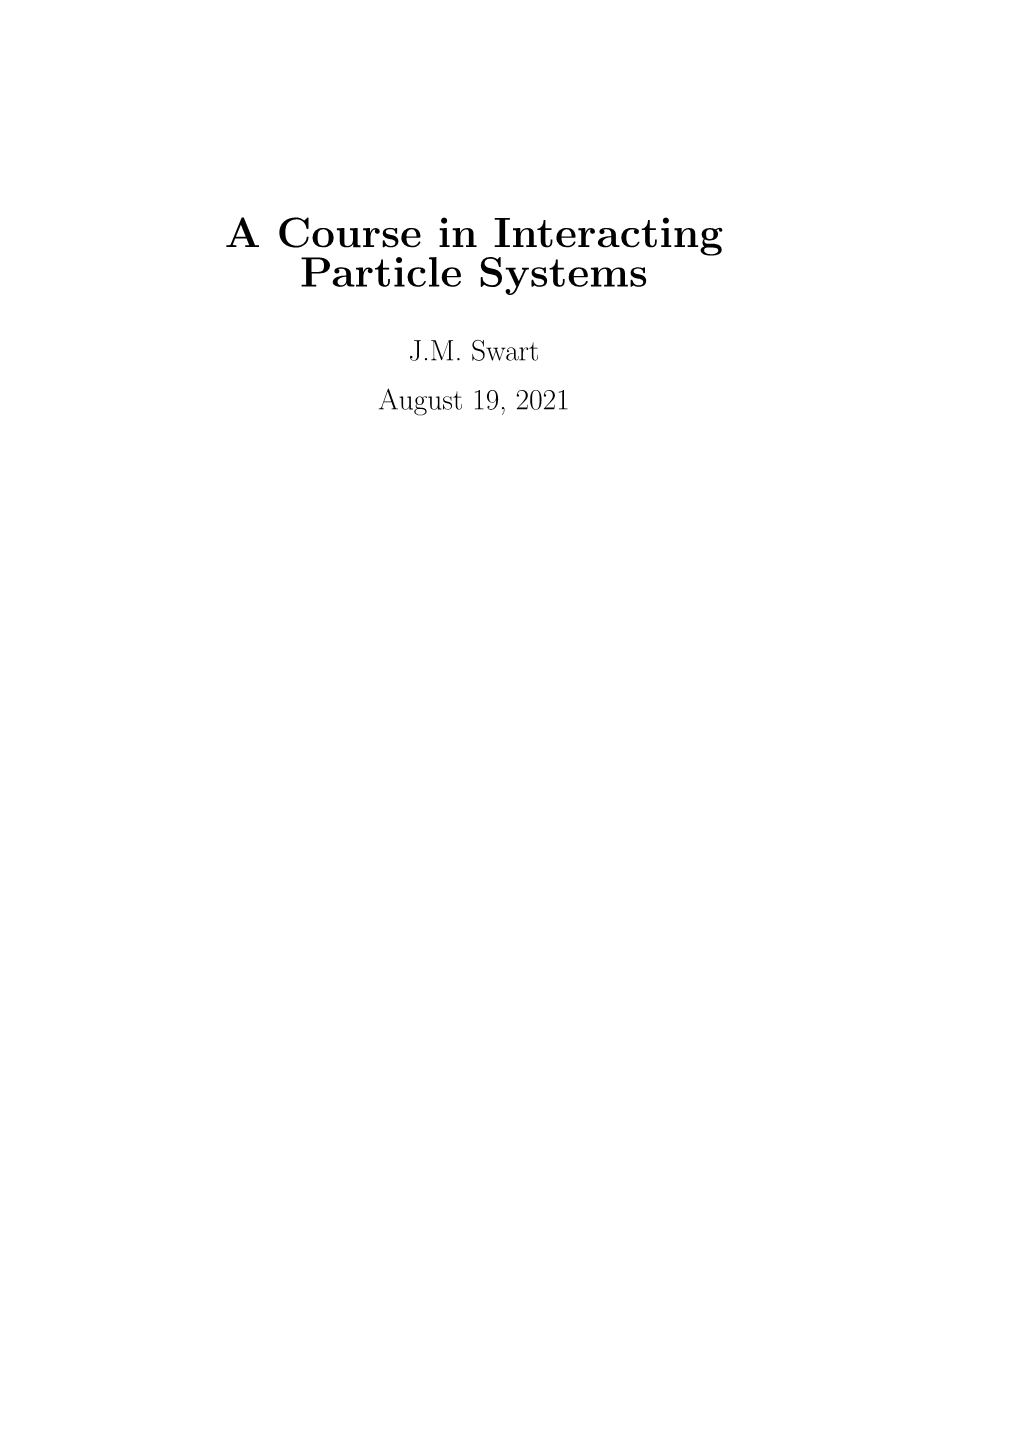 A Course in Interacting Particle Systems